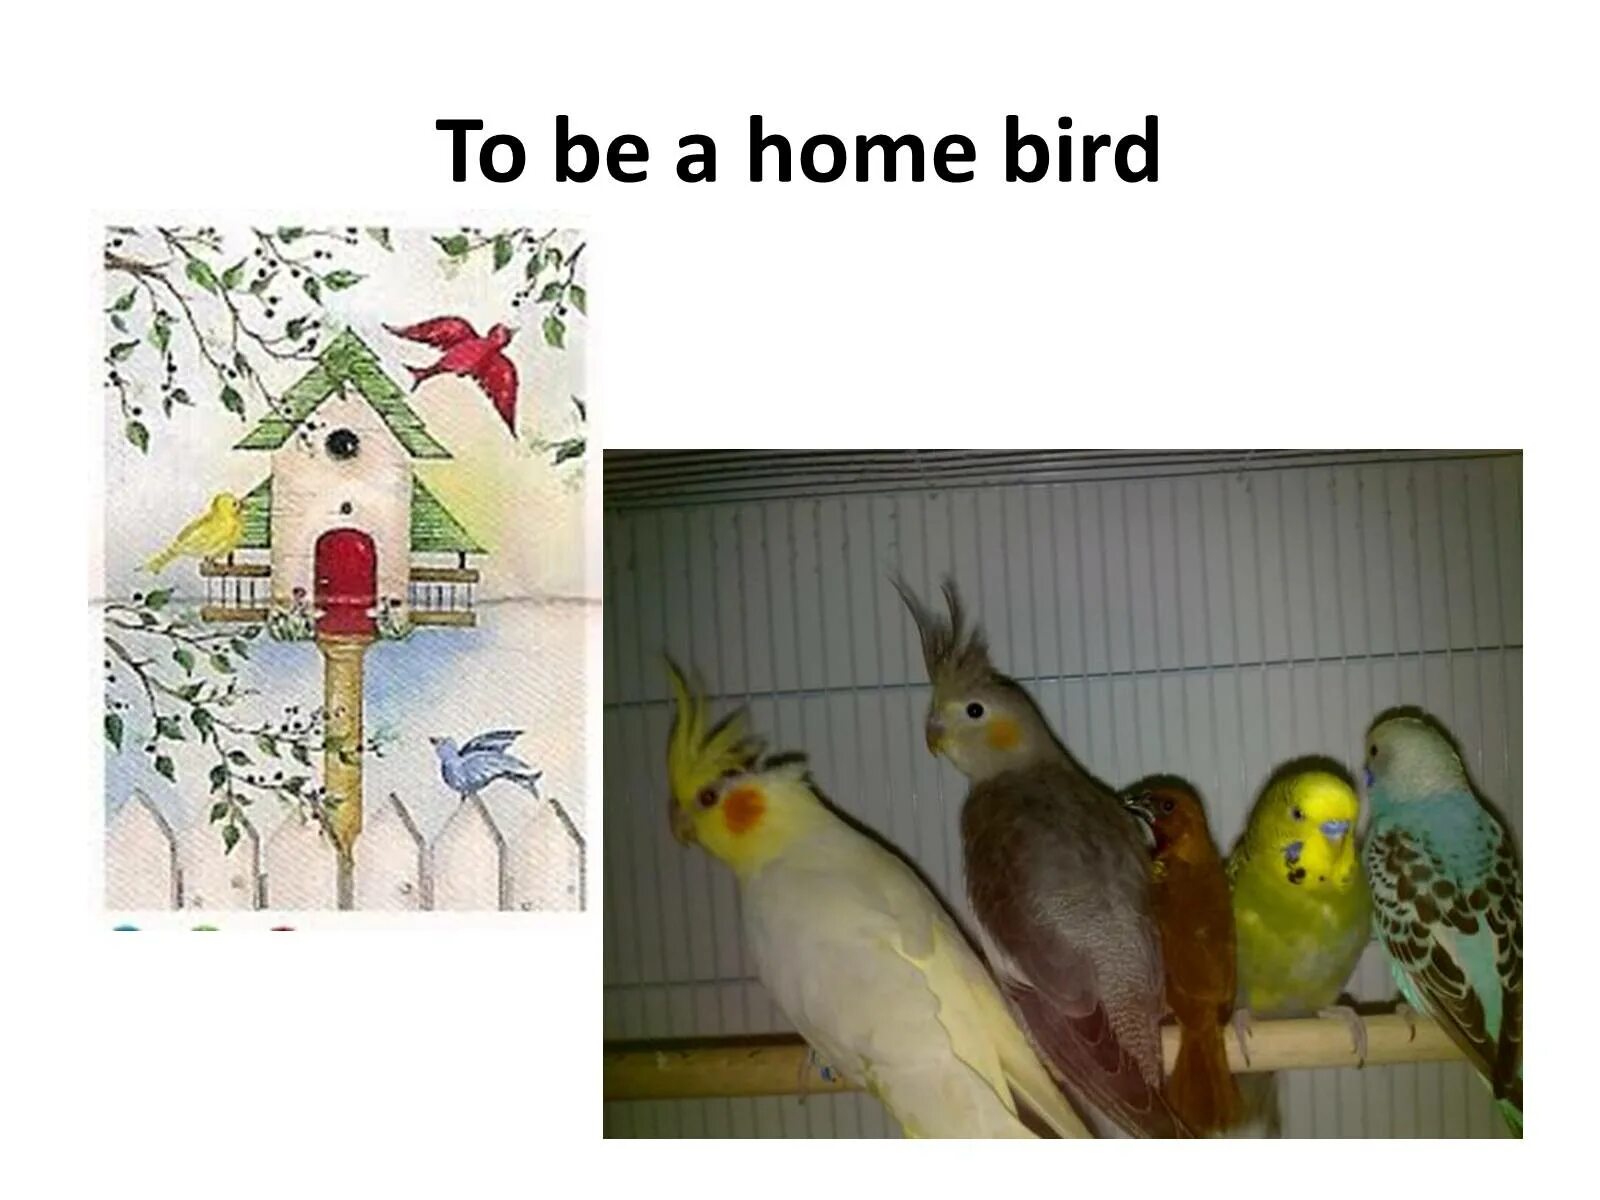 Home bird. Bird Home. Find the Home to the Bird. A knowing old Bird idiom.